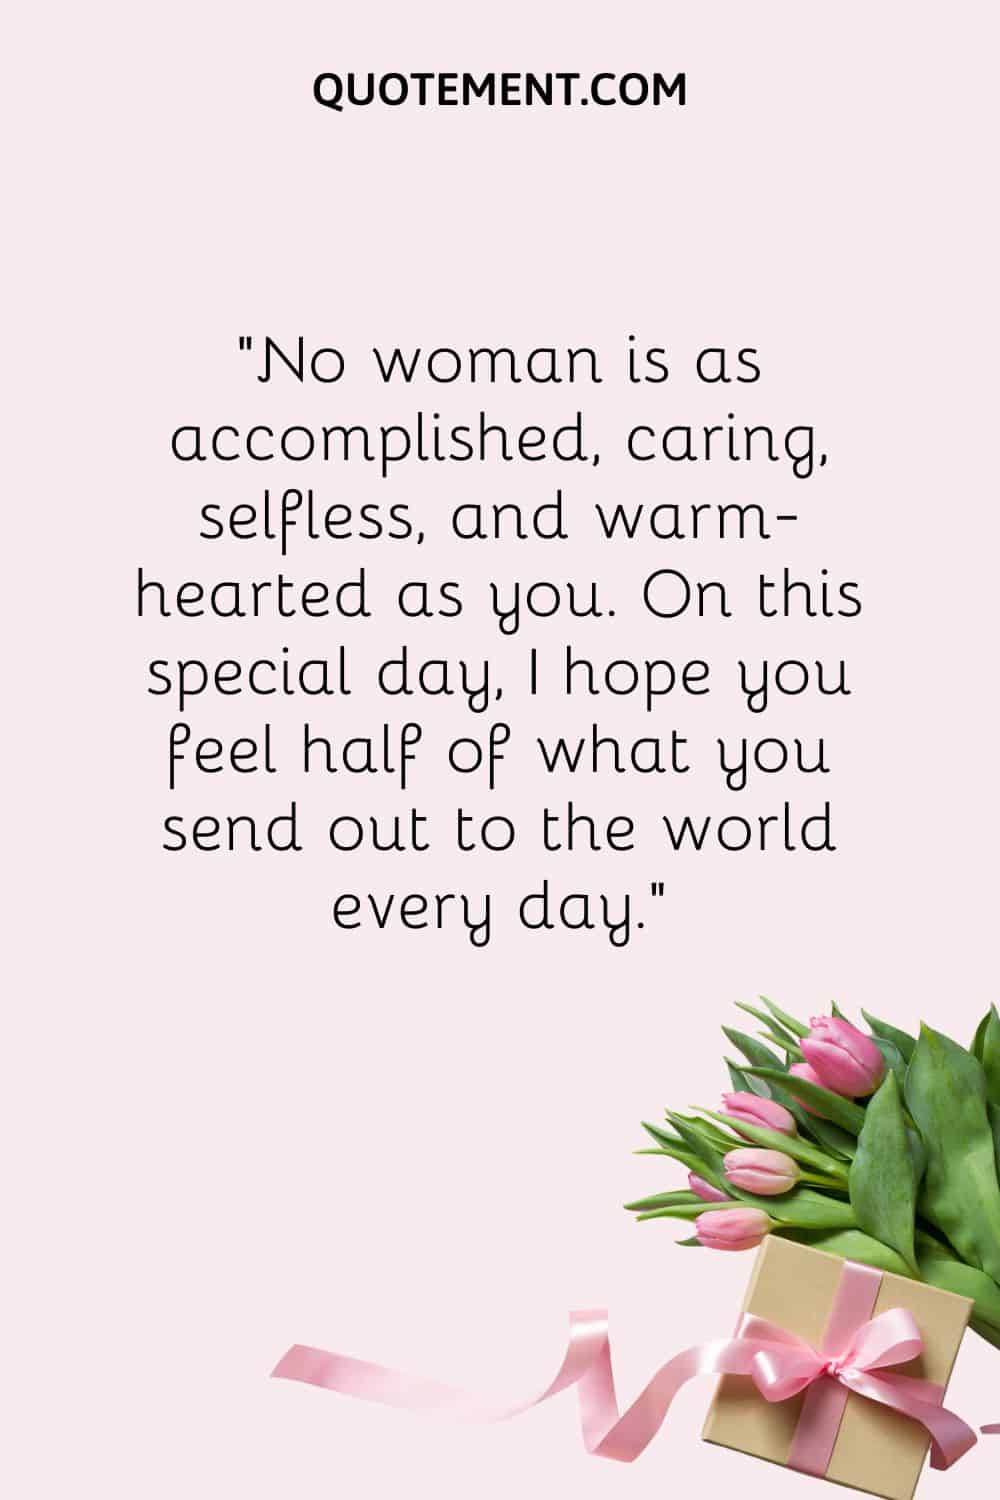 No woman is as accomplished, caring, selfless, and warm-hearted as you